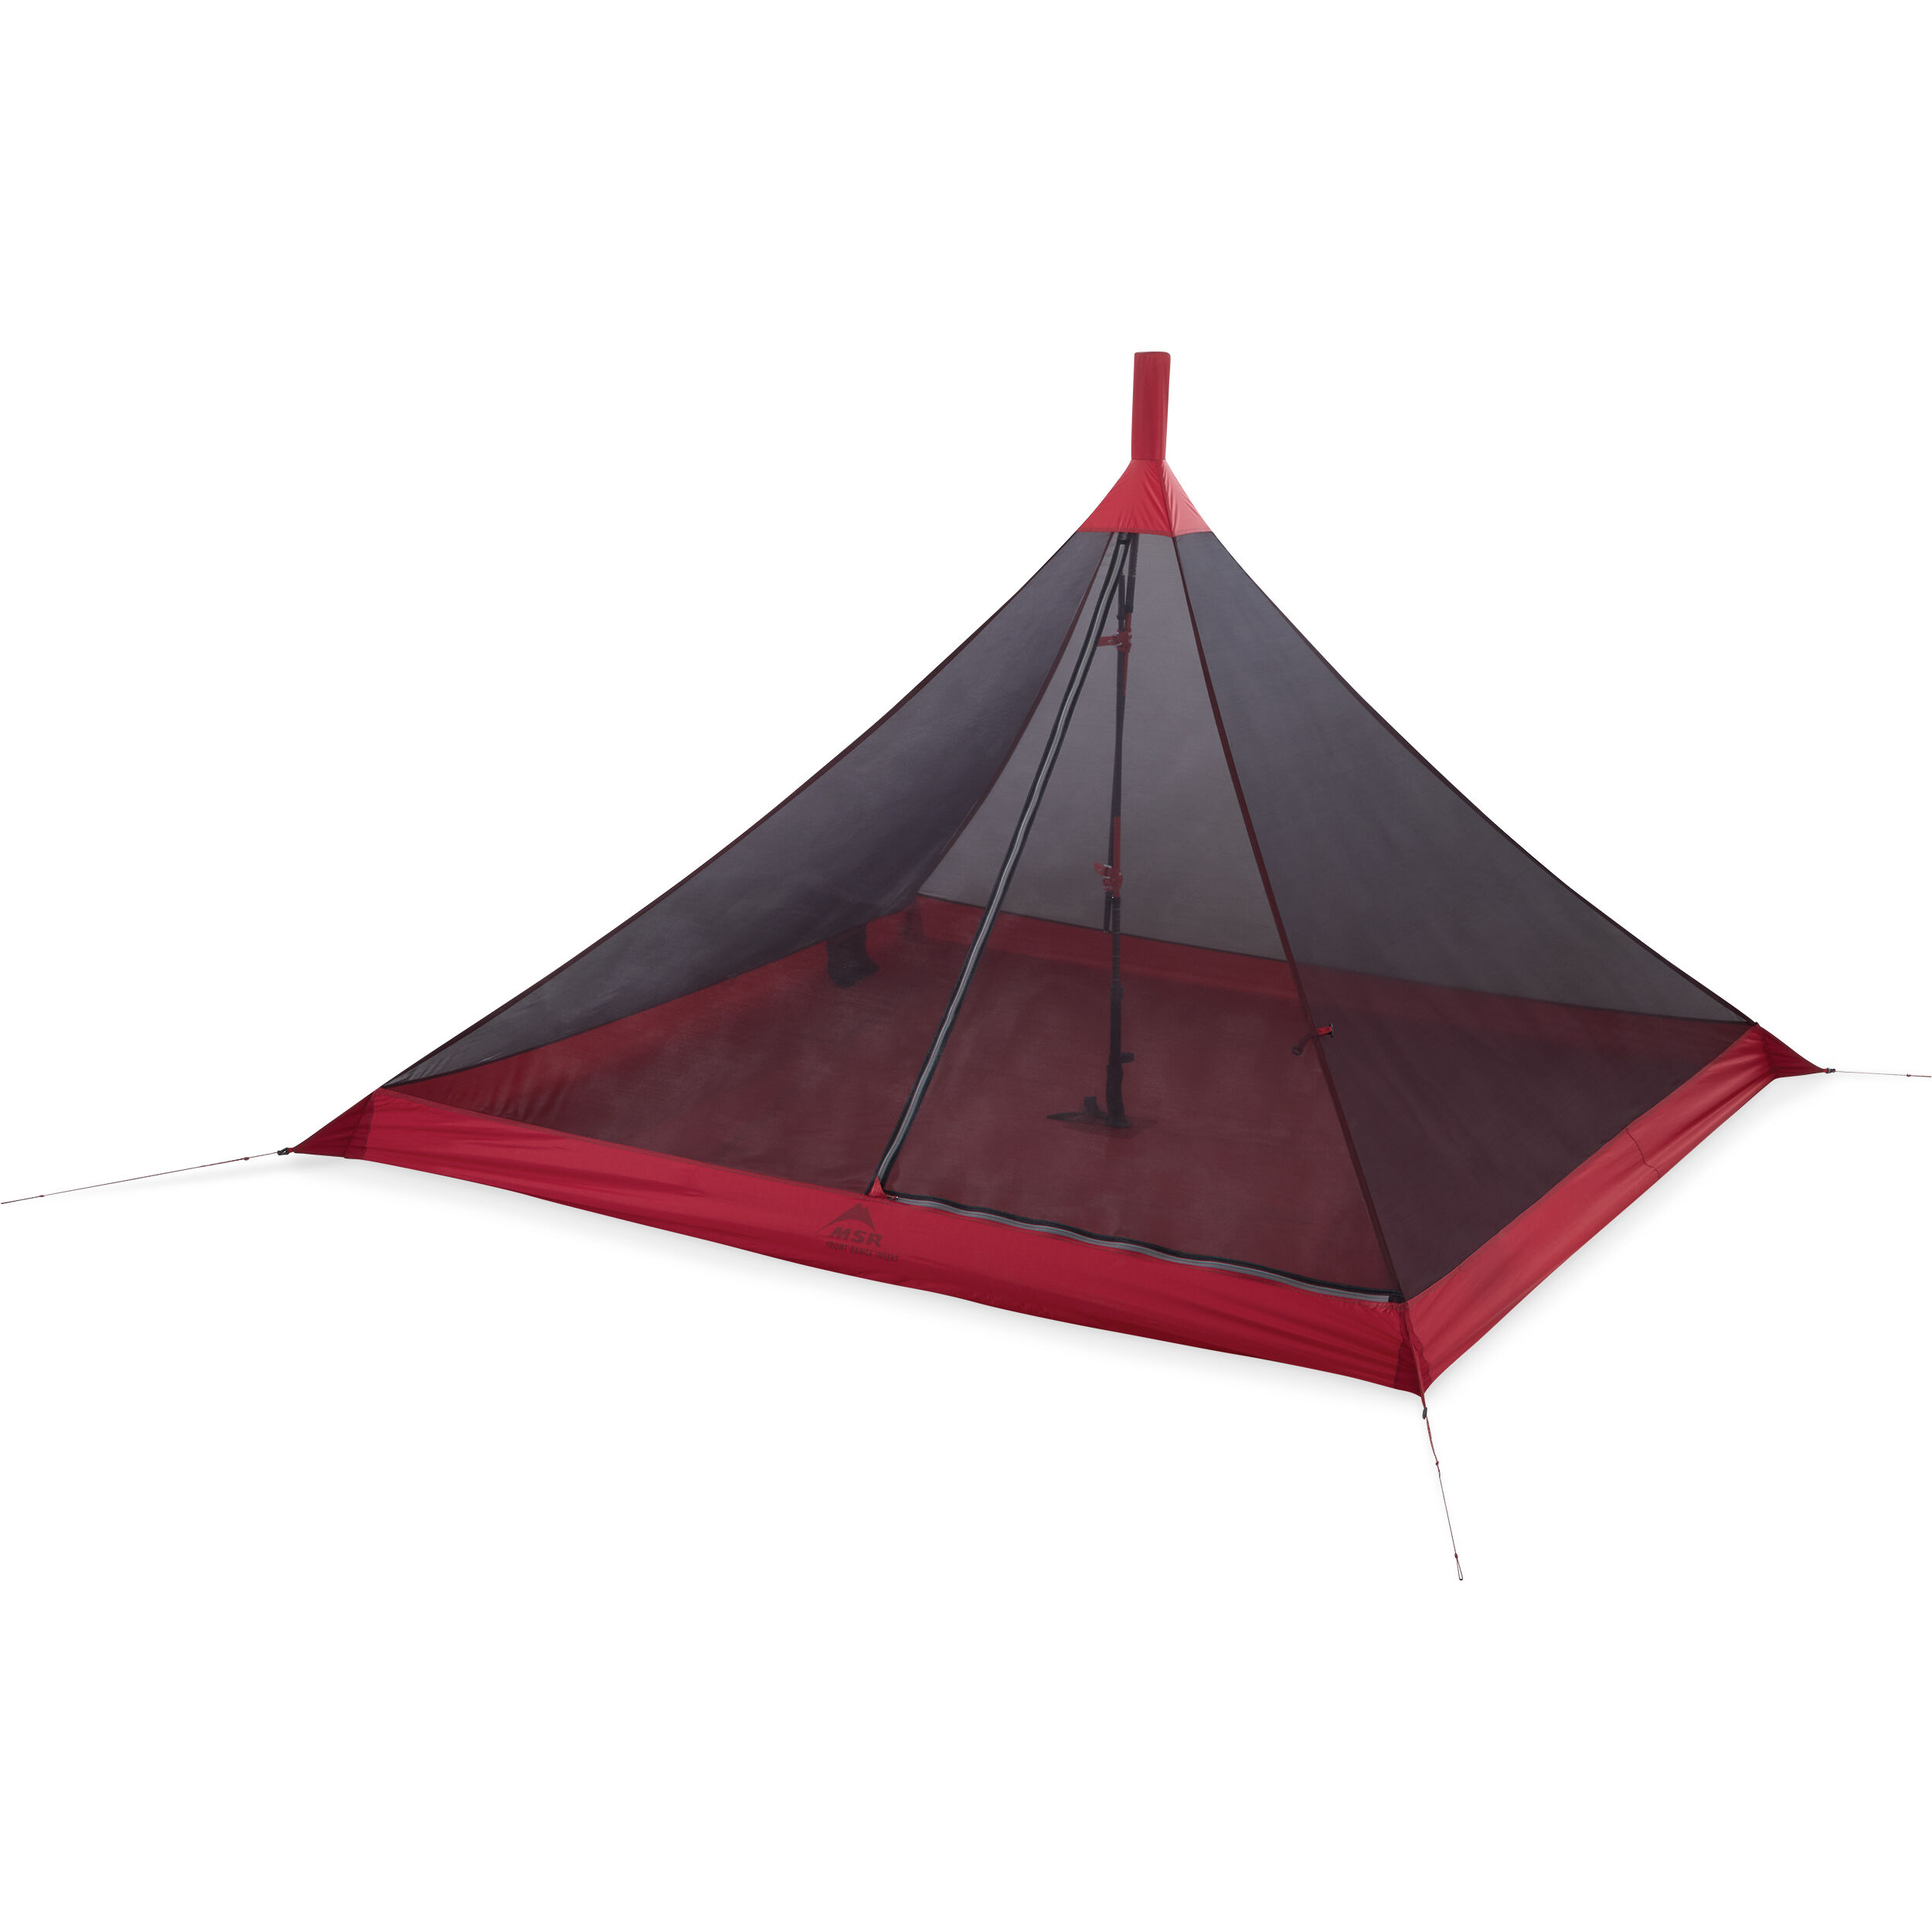 Camping Shelters | Minimalist Tent & Shelter Wings | MSR